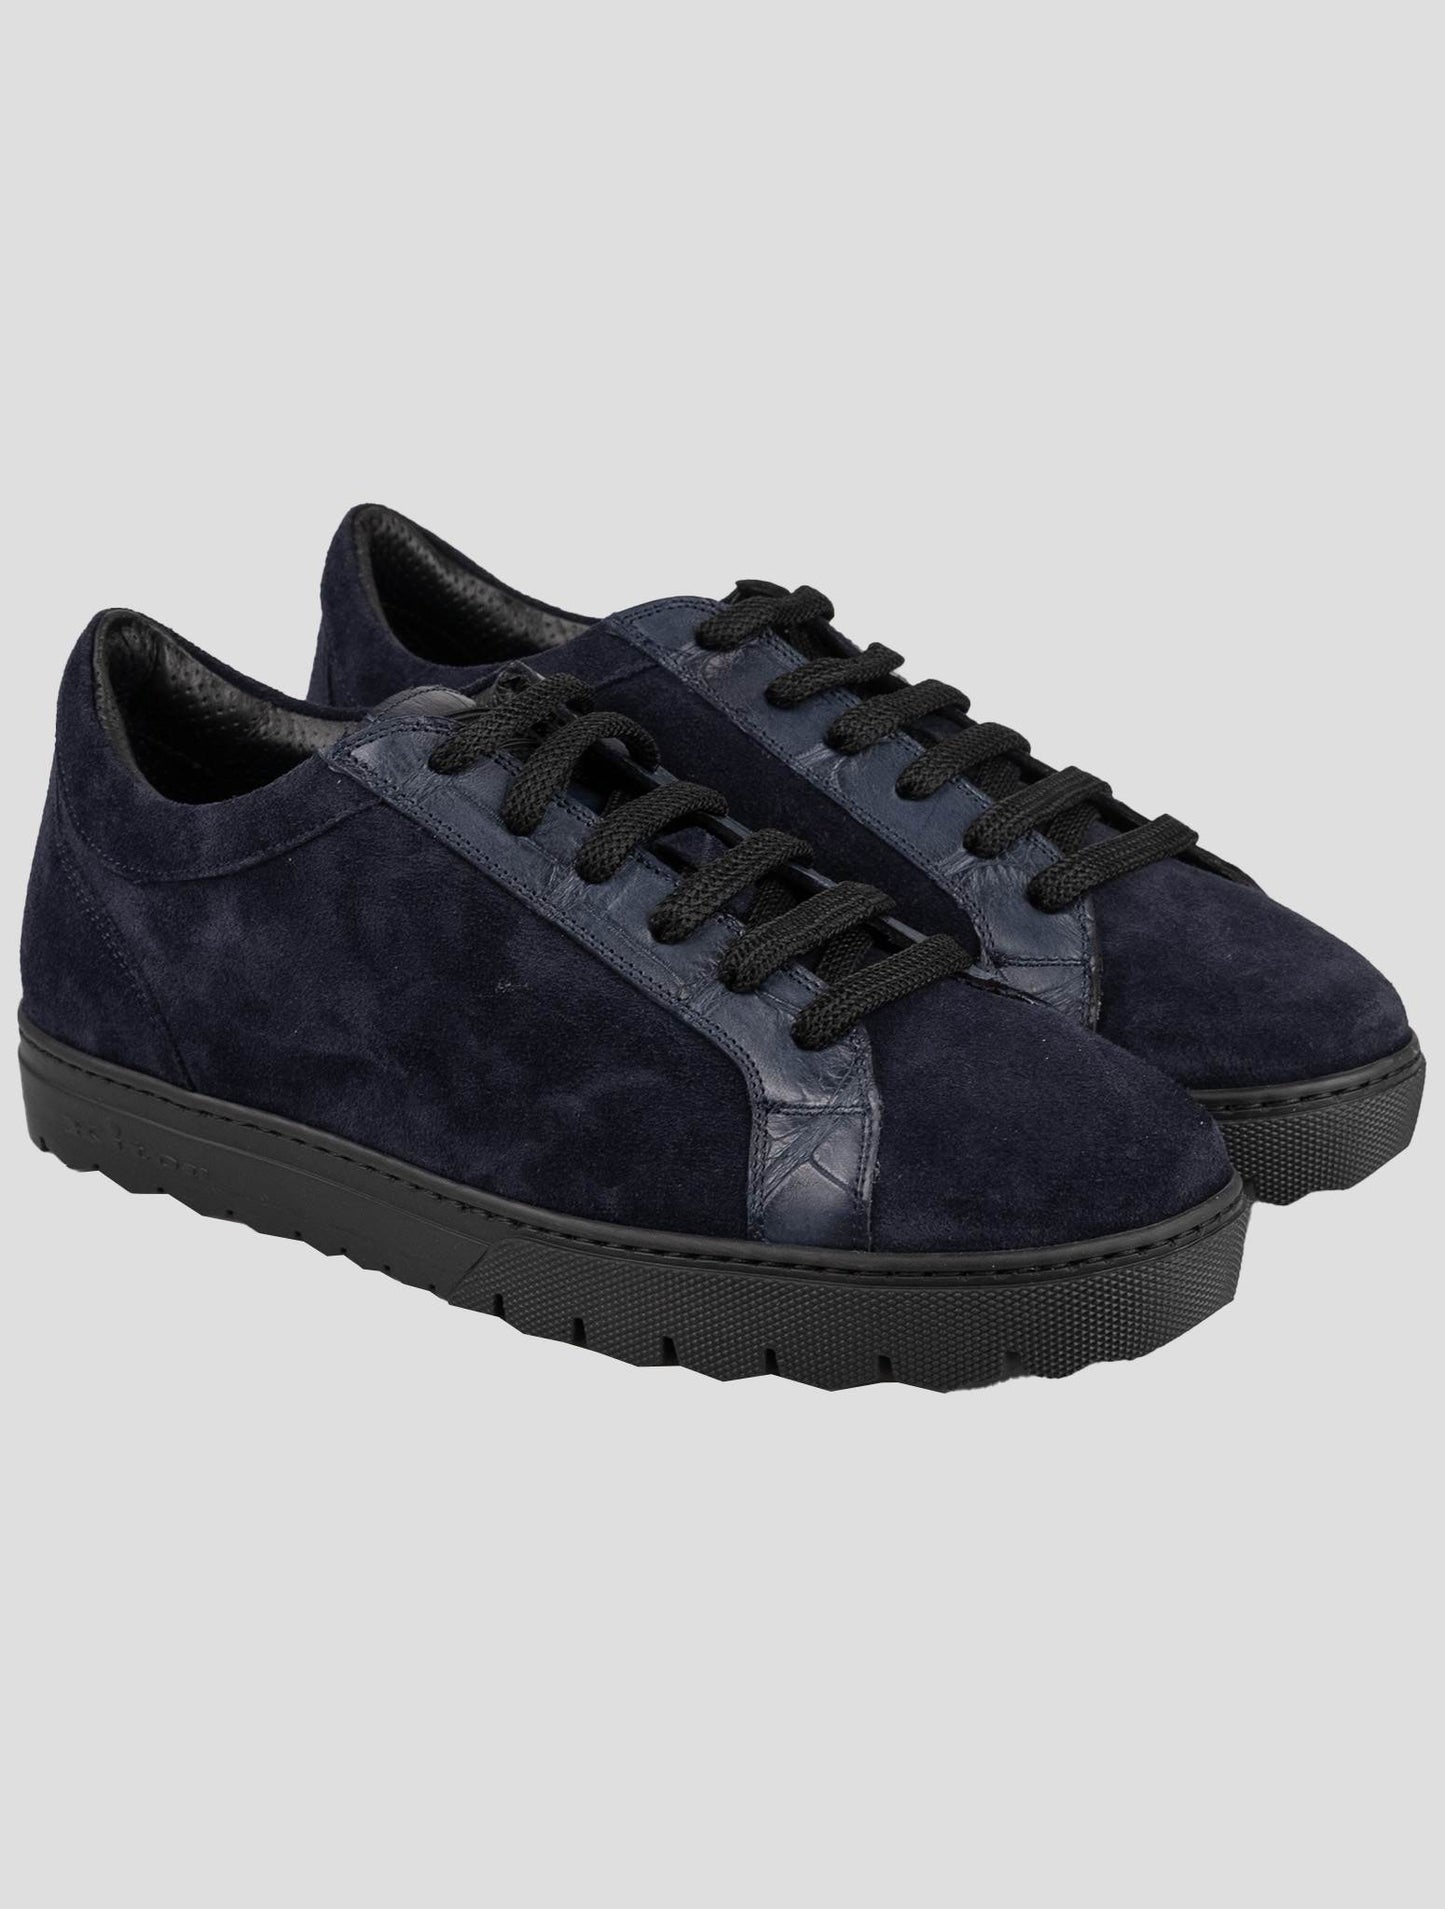 Kiton Blue Leather Crocodile Leather Suede Sneakers